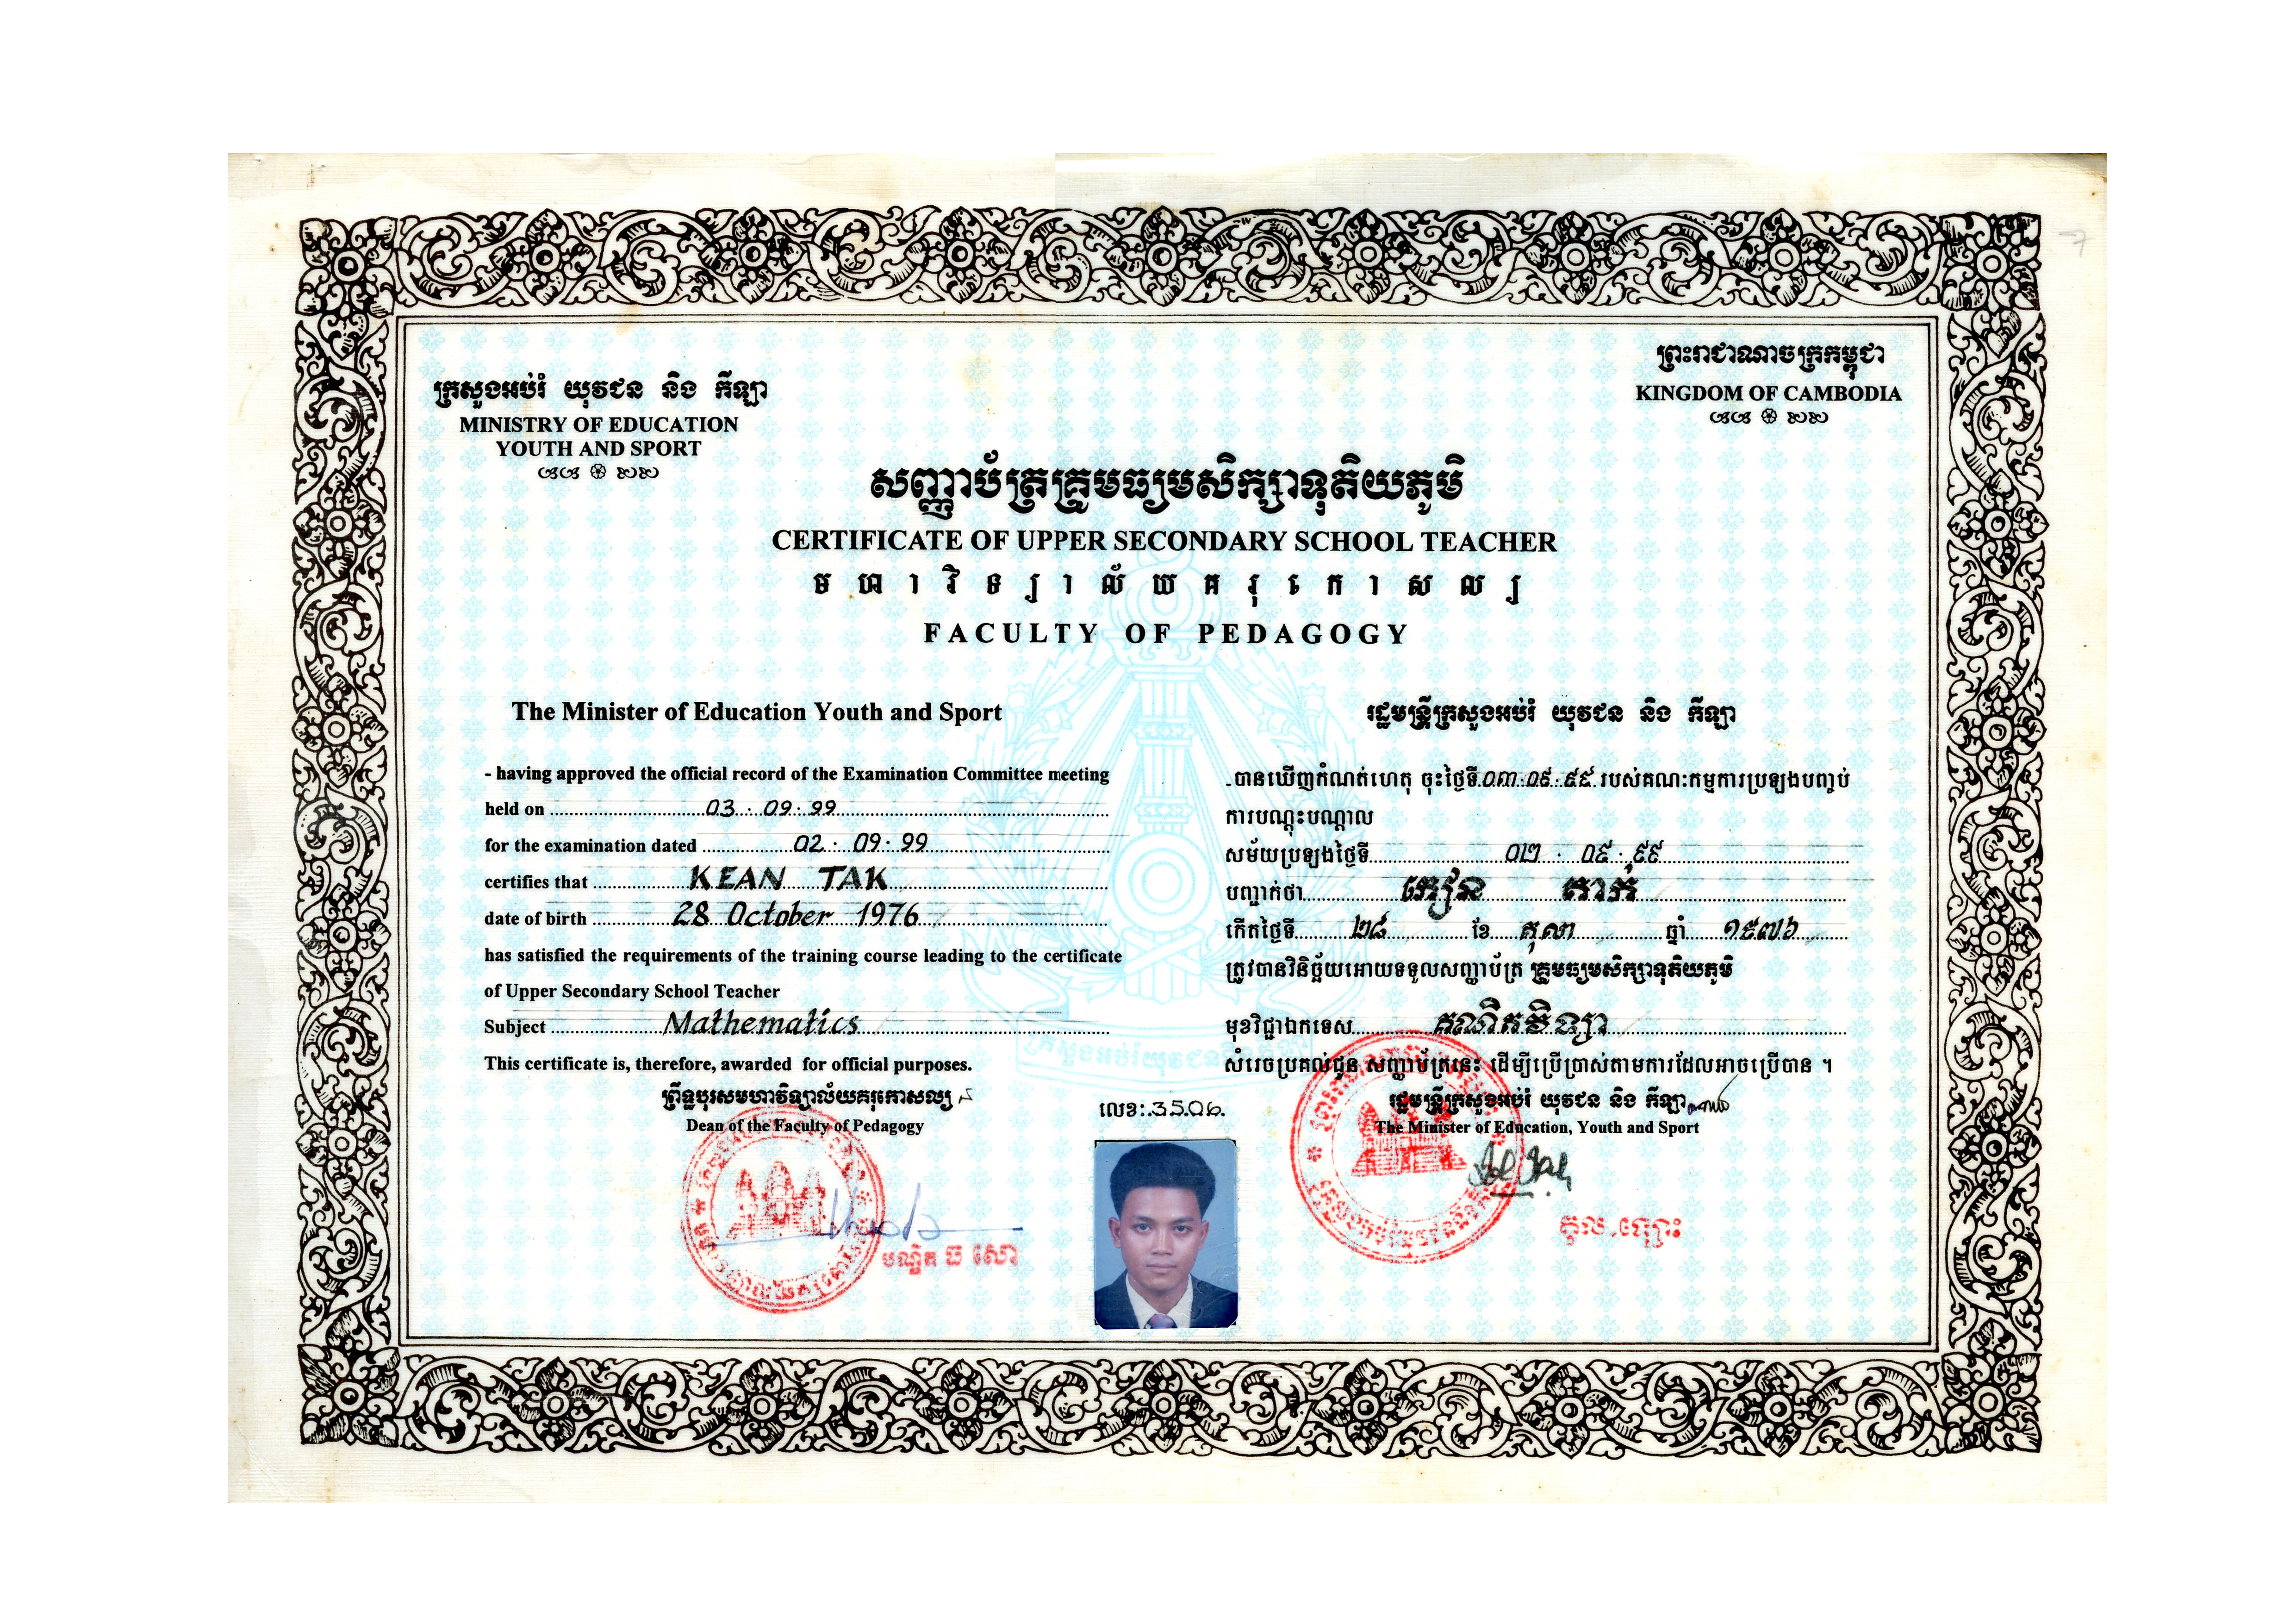 Click to see full certificate